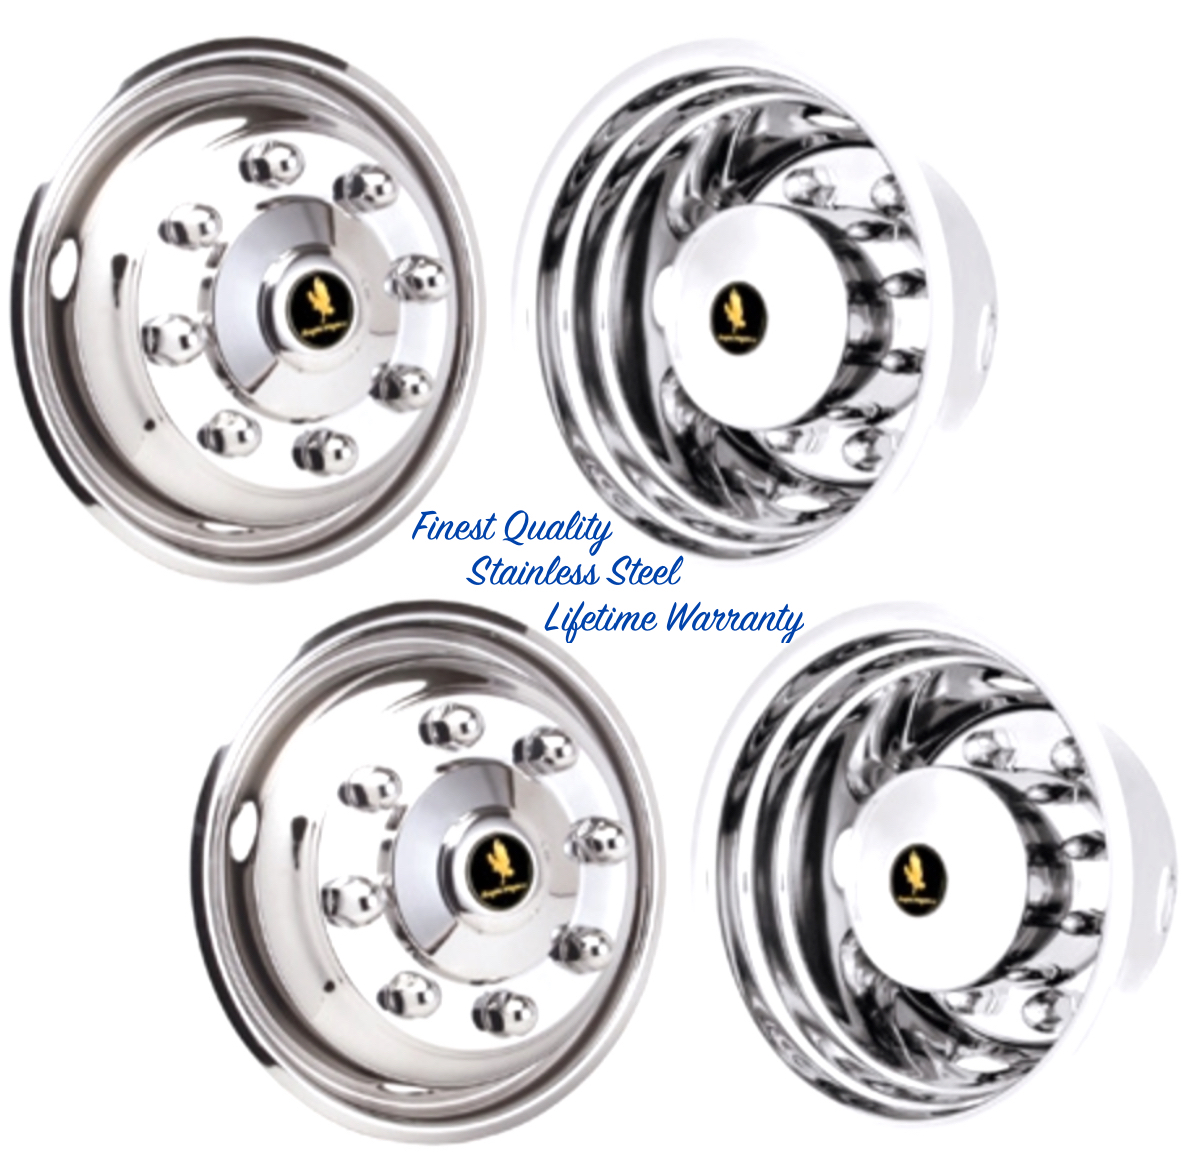 WHEEL
        SIMULATOR WHEEL COVER RIM LINER HUBCAPS for Chevrolet and GMC
        Workhorse W Series vehicles equipped with 19.5" x
        6.75" steel wheels that have 8 Lugs and 4 Hand Holes.